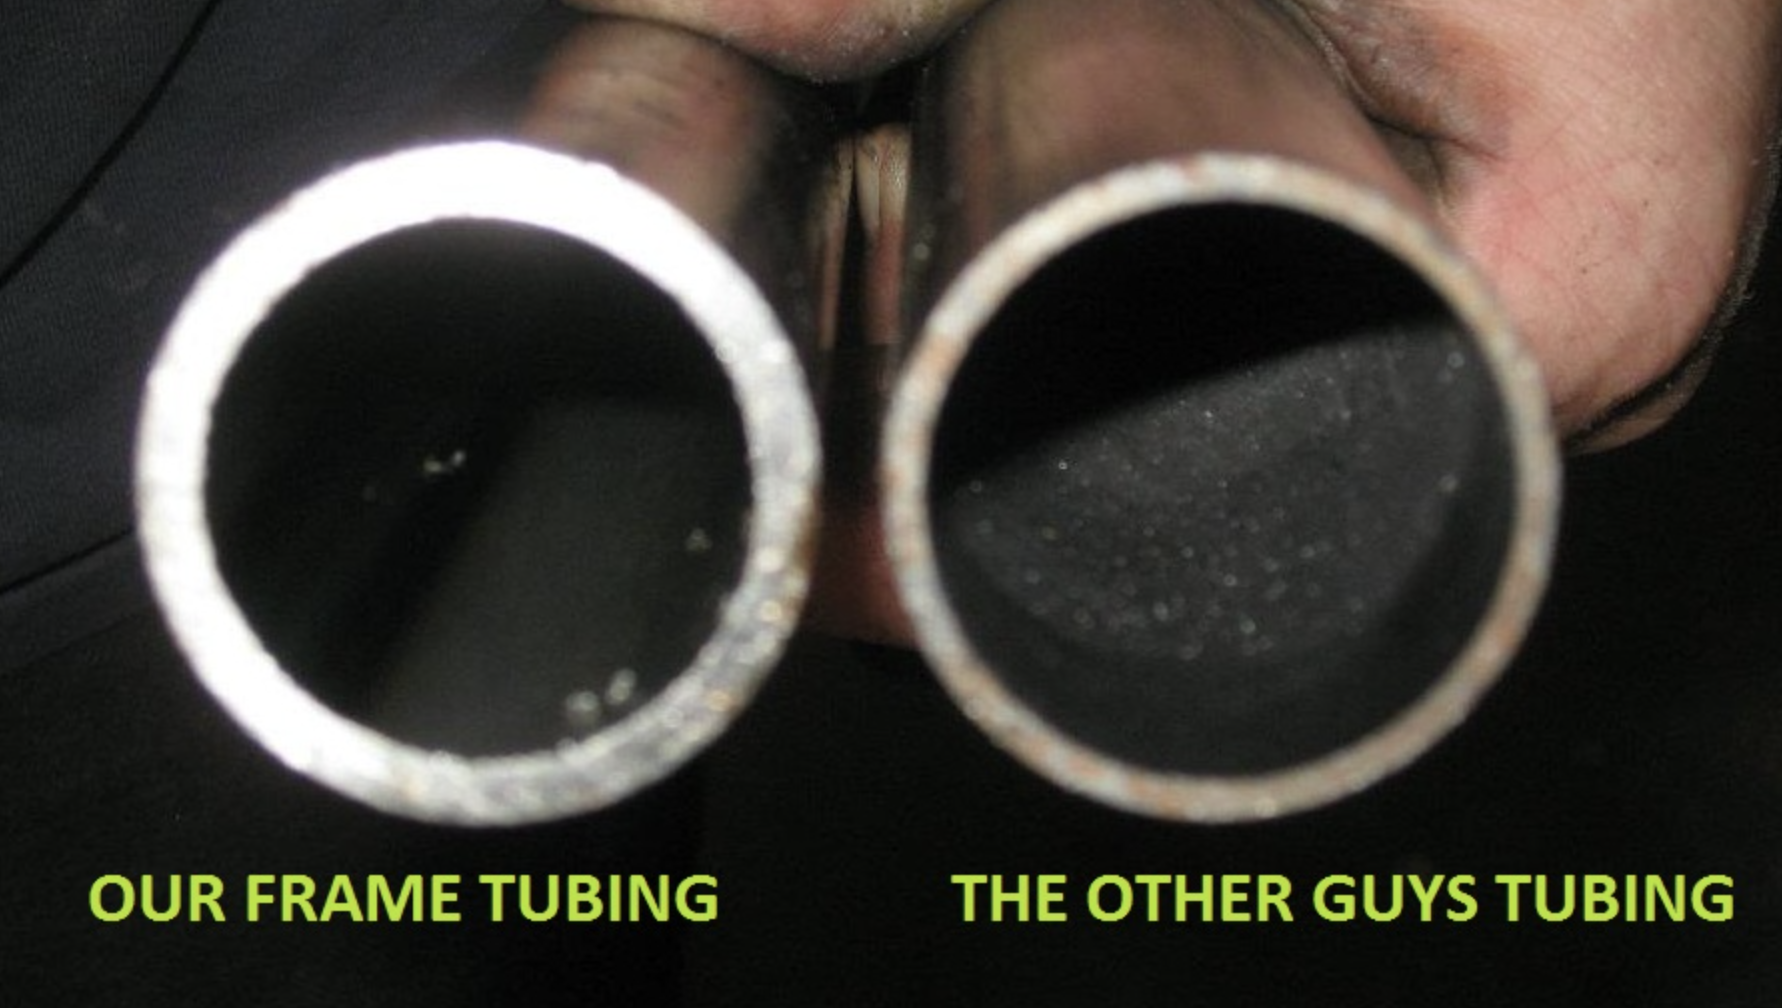 V-Dub Store's frame tubing versus competitor's tubing.